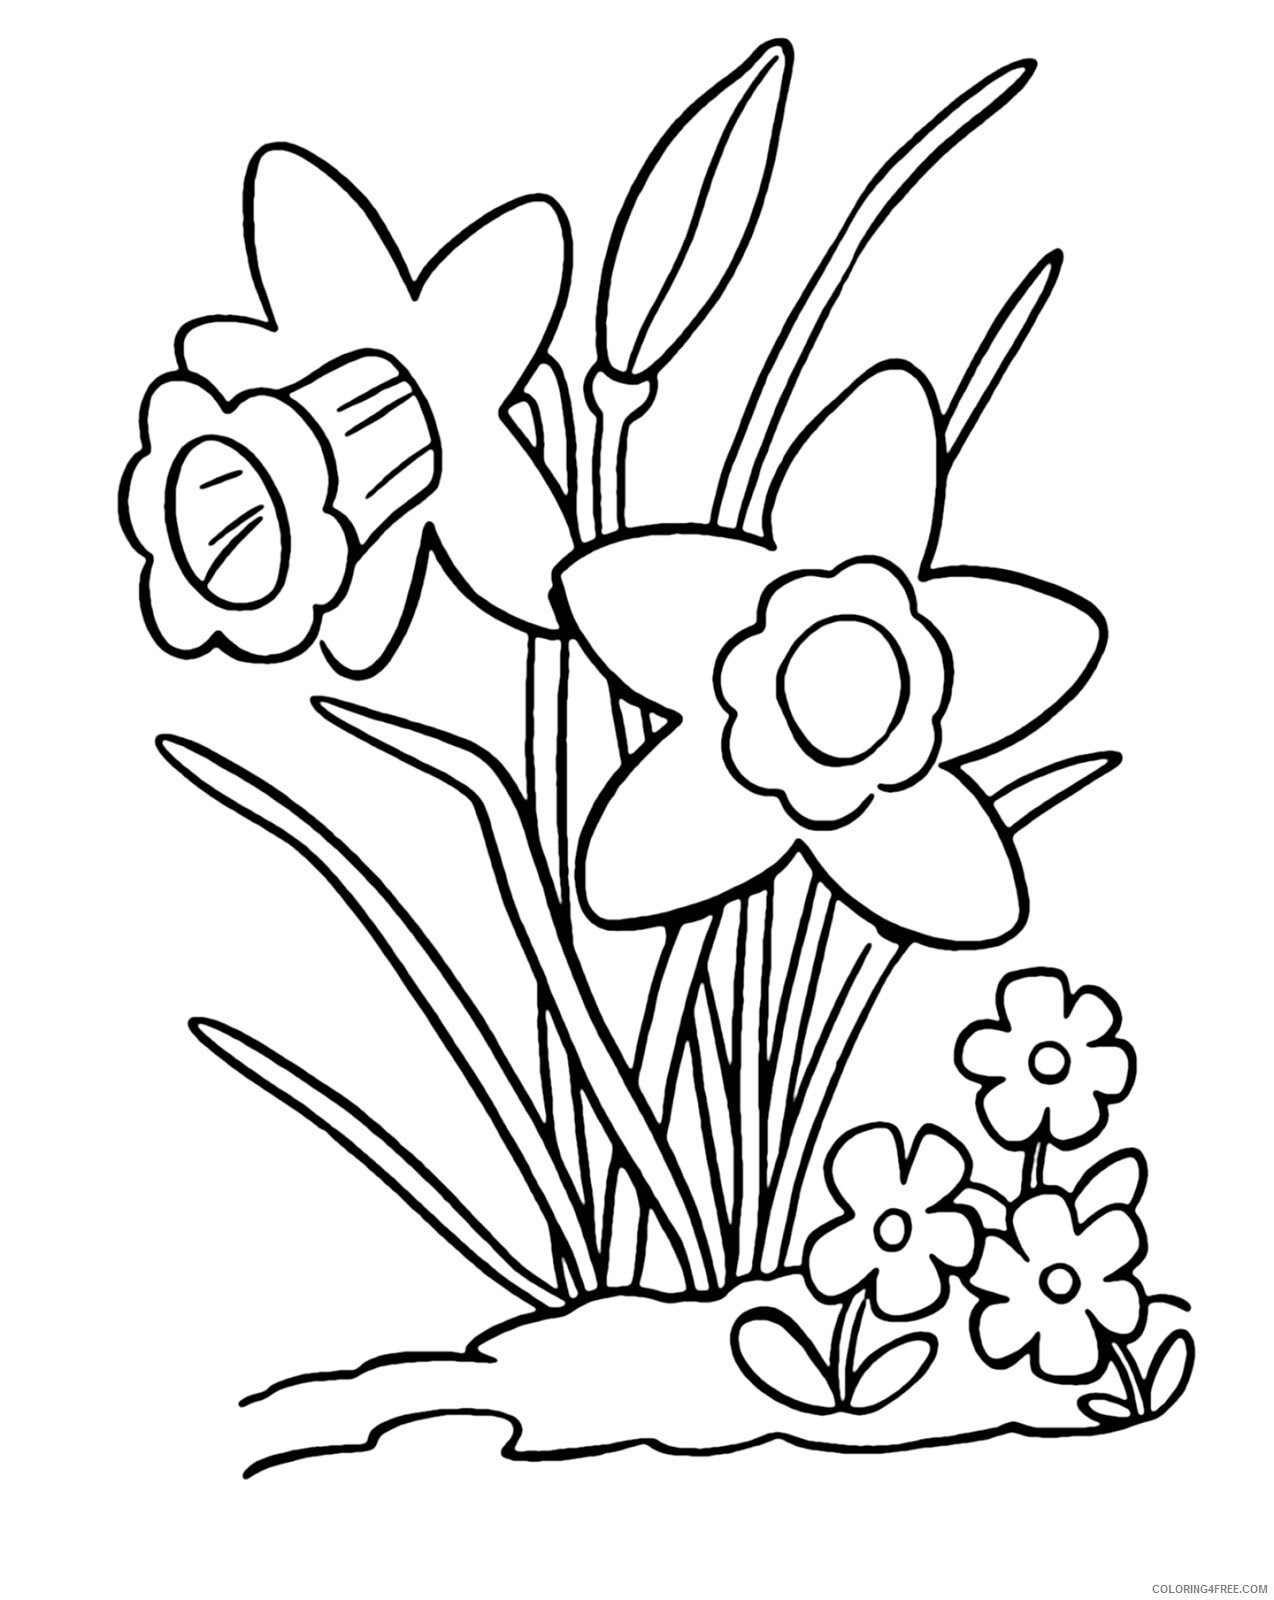 Daffodil Coloring Pages Flowers Nature Daffodils Printable 2021 102 Coloring4free